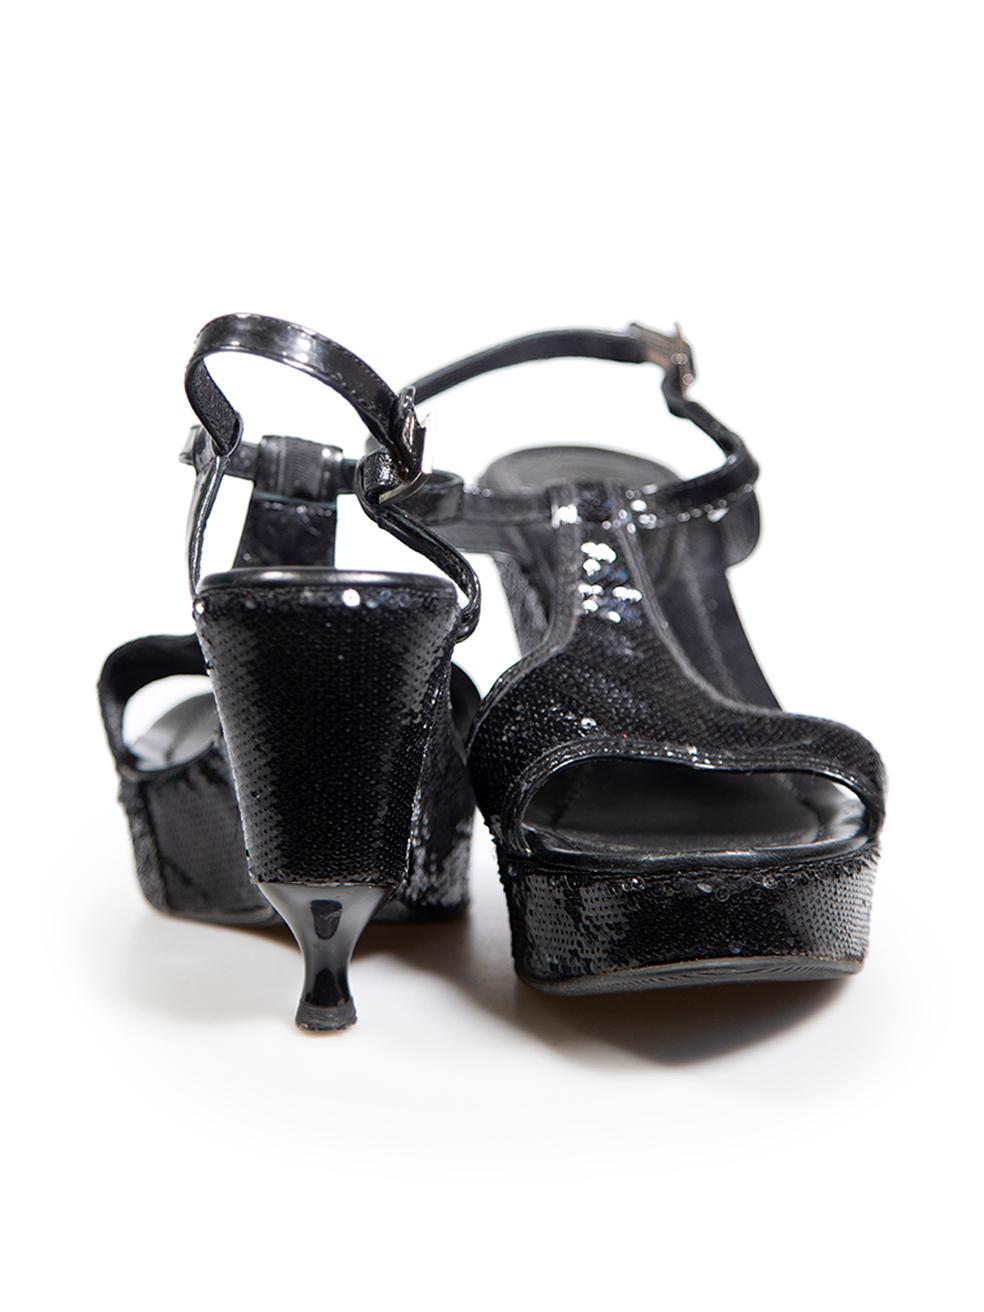 Fendi Black Sequinned Kitten Wedge Sandals Size IT 38.5 In Good Condition For Sale In London, GB